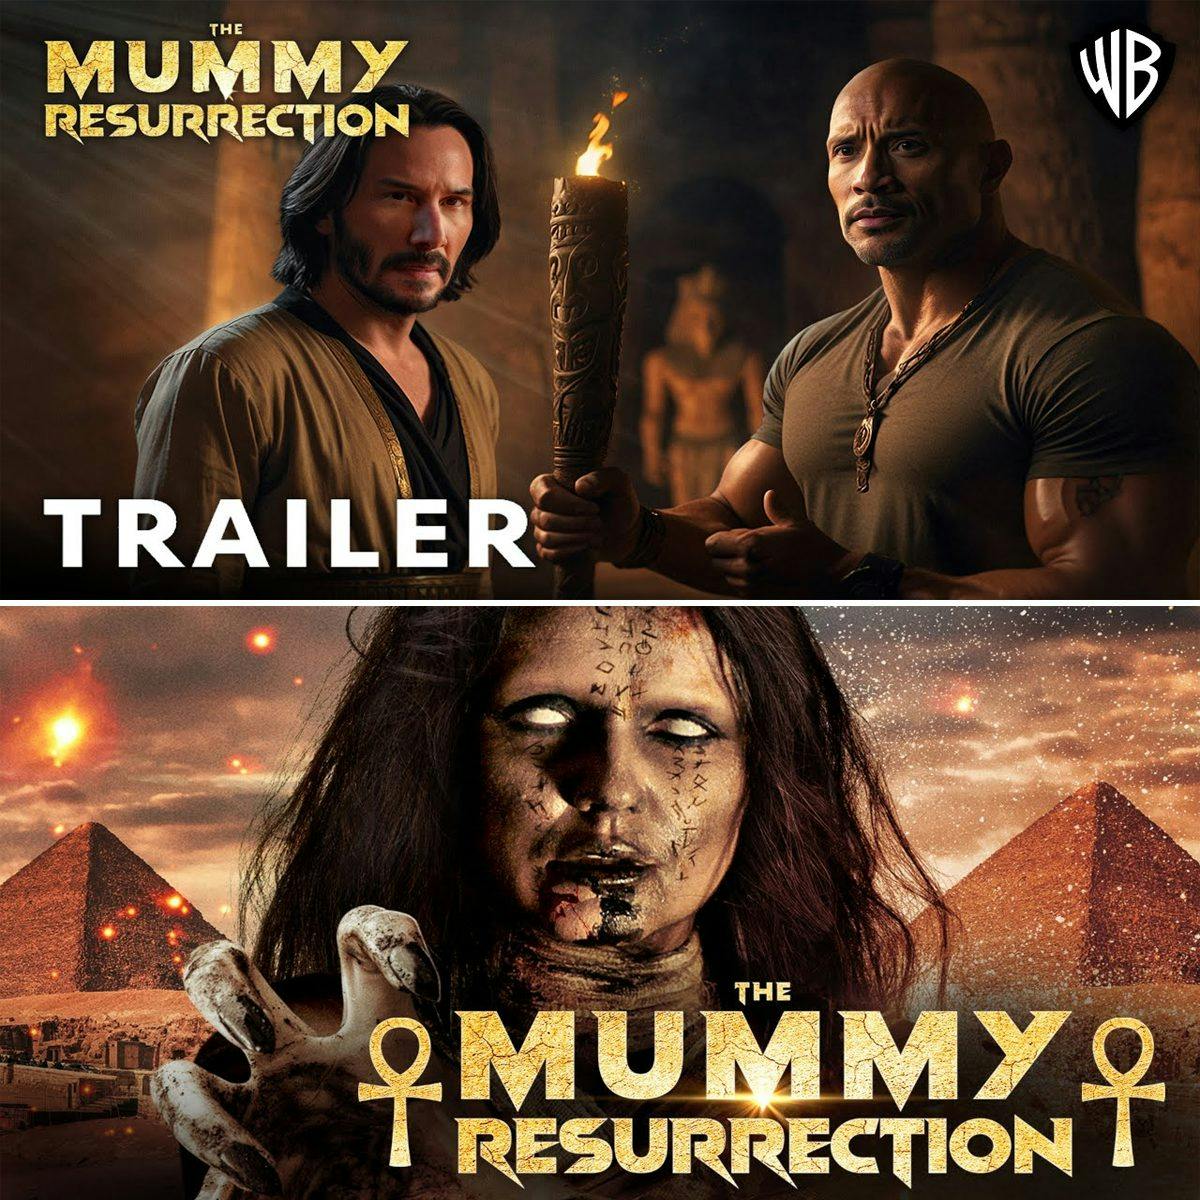 Cover Image for “The Mummy Resurrection” Unveils Thrilling Trailer Starring Dwayne Johnson and Keanu Reeves